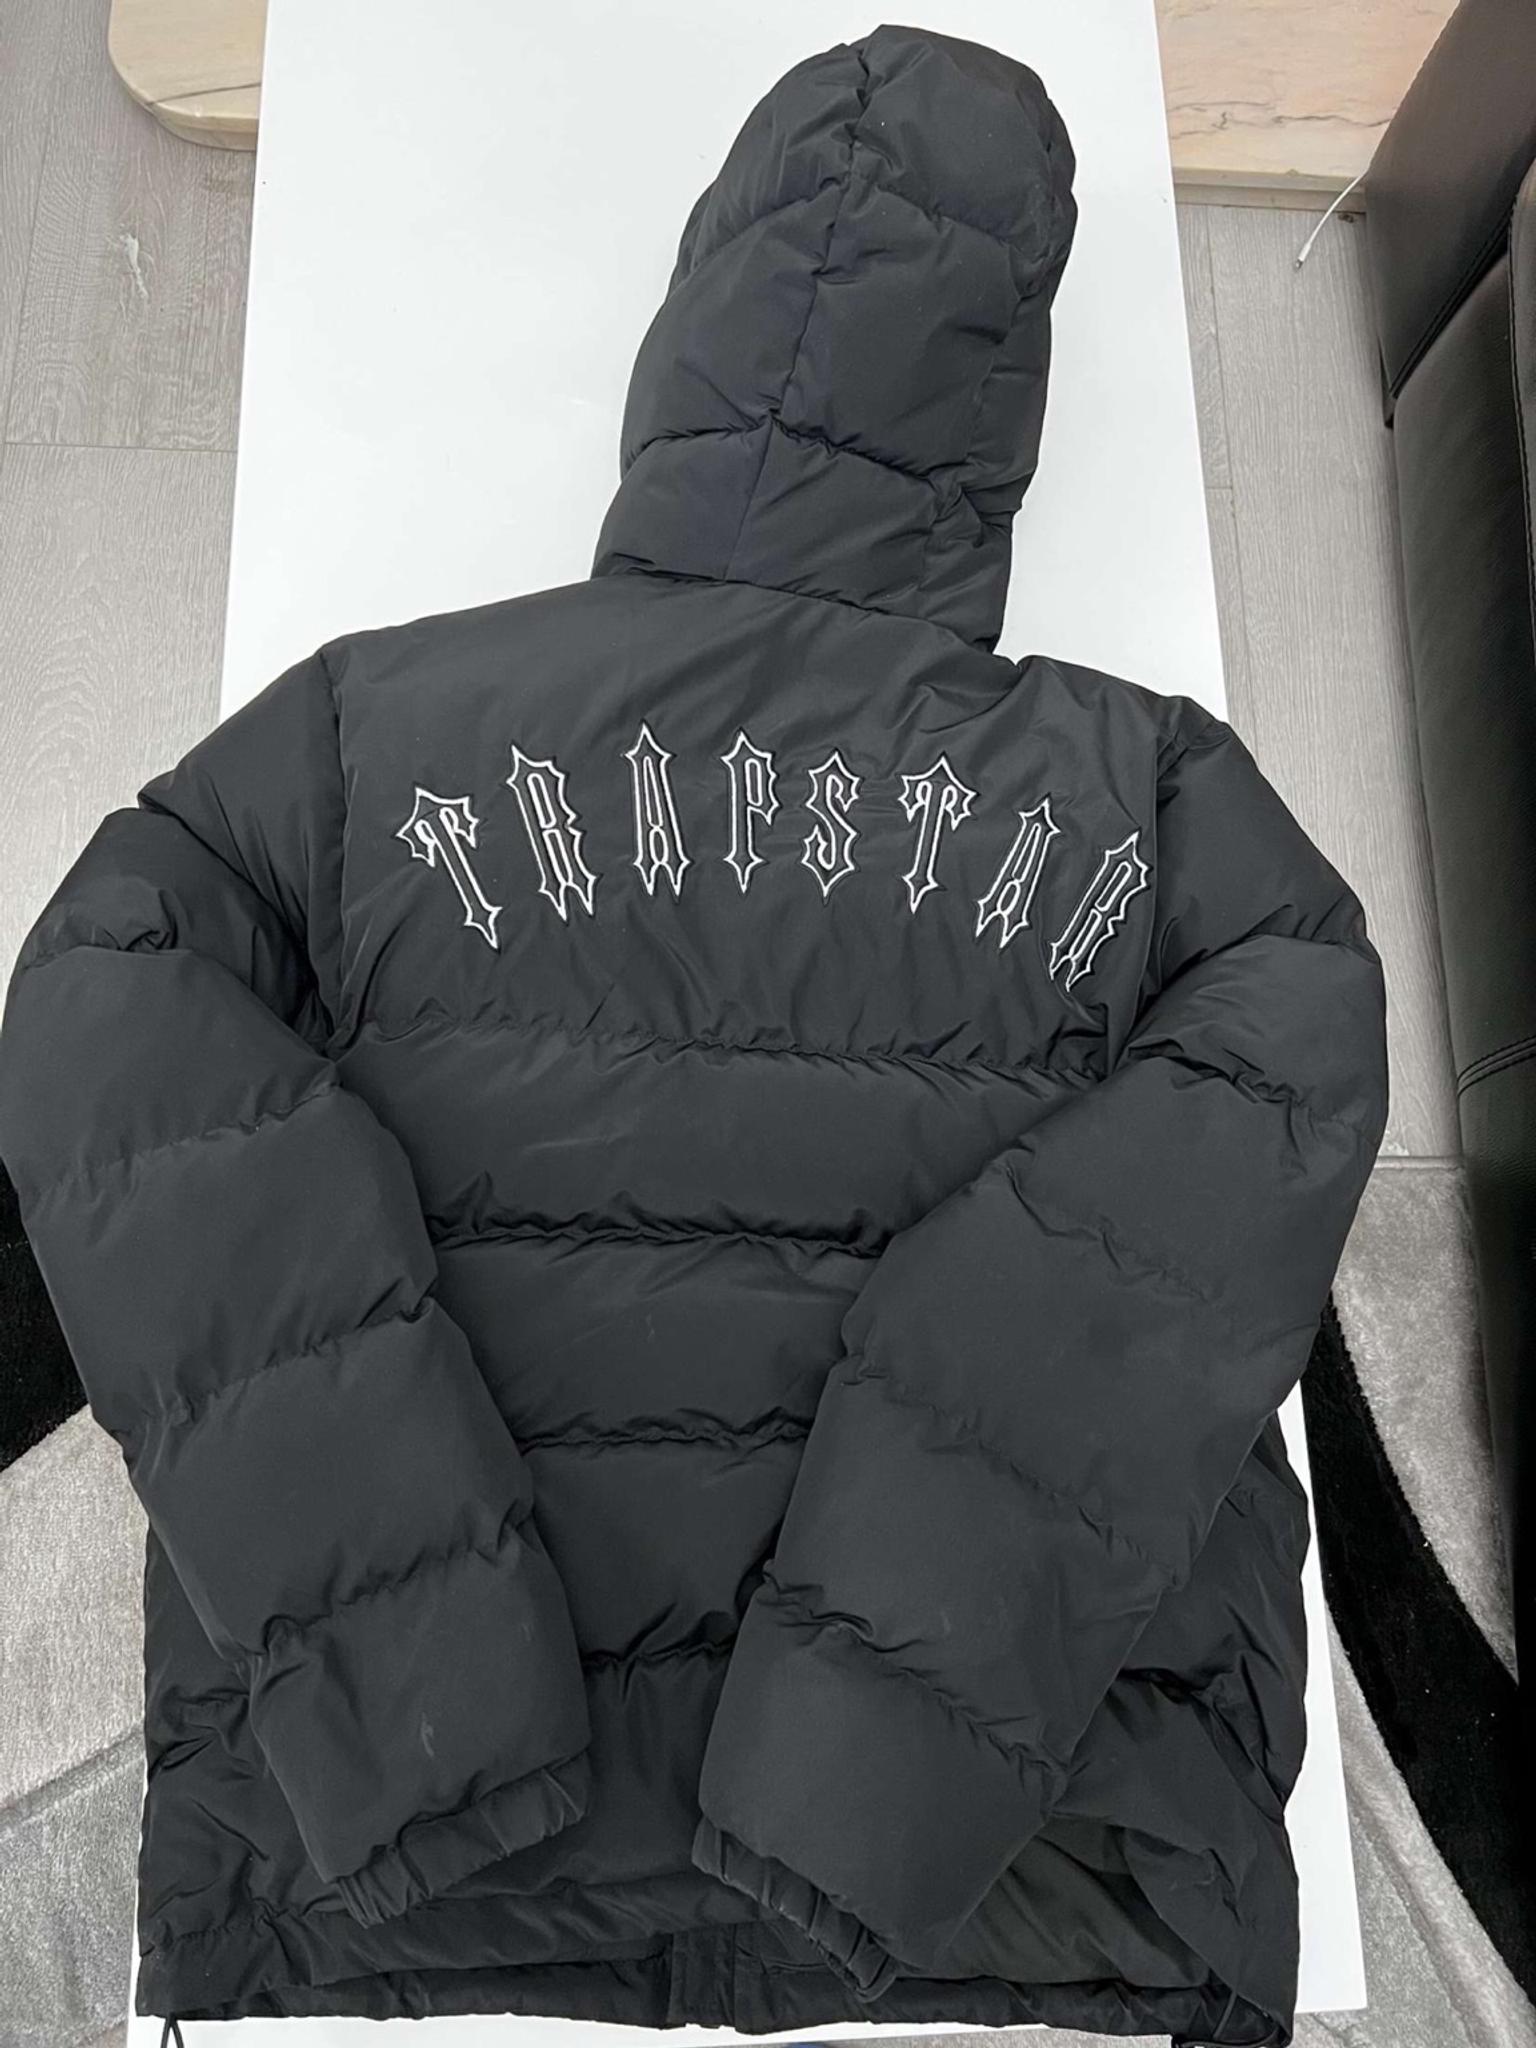 Black trapstar jacket in NW7 London for £170.00 for sale | Shpock